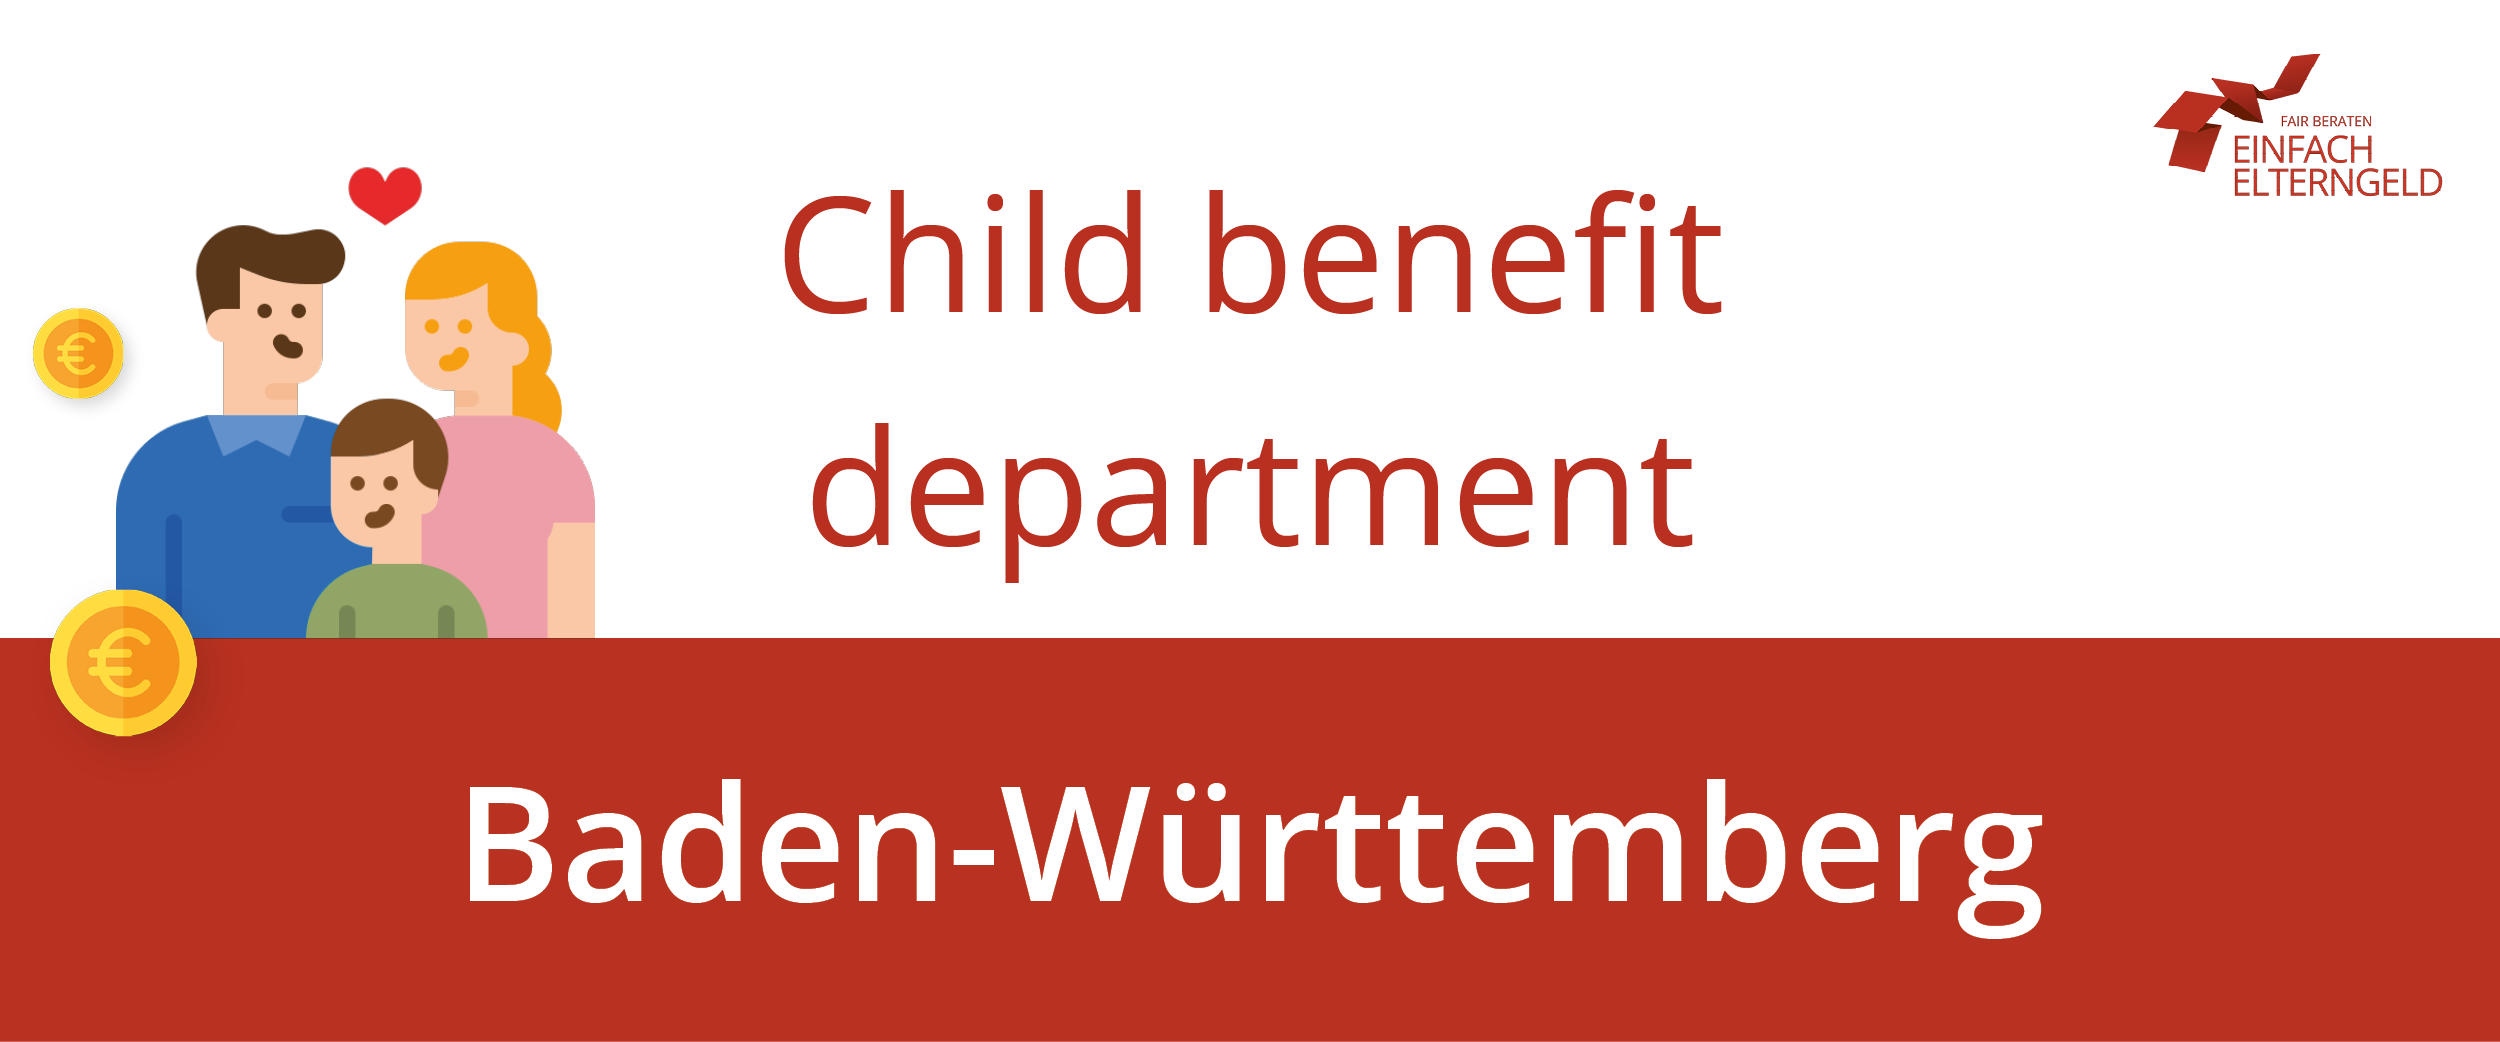 We introduce you to the child benefit department Baden-Württemberg.